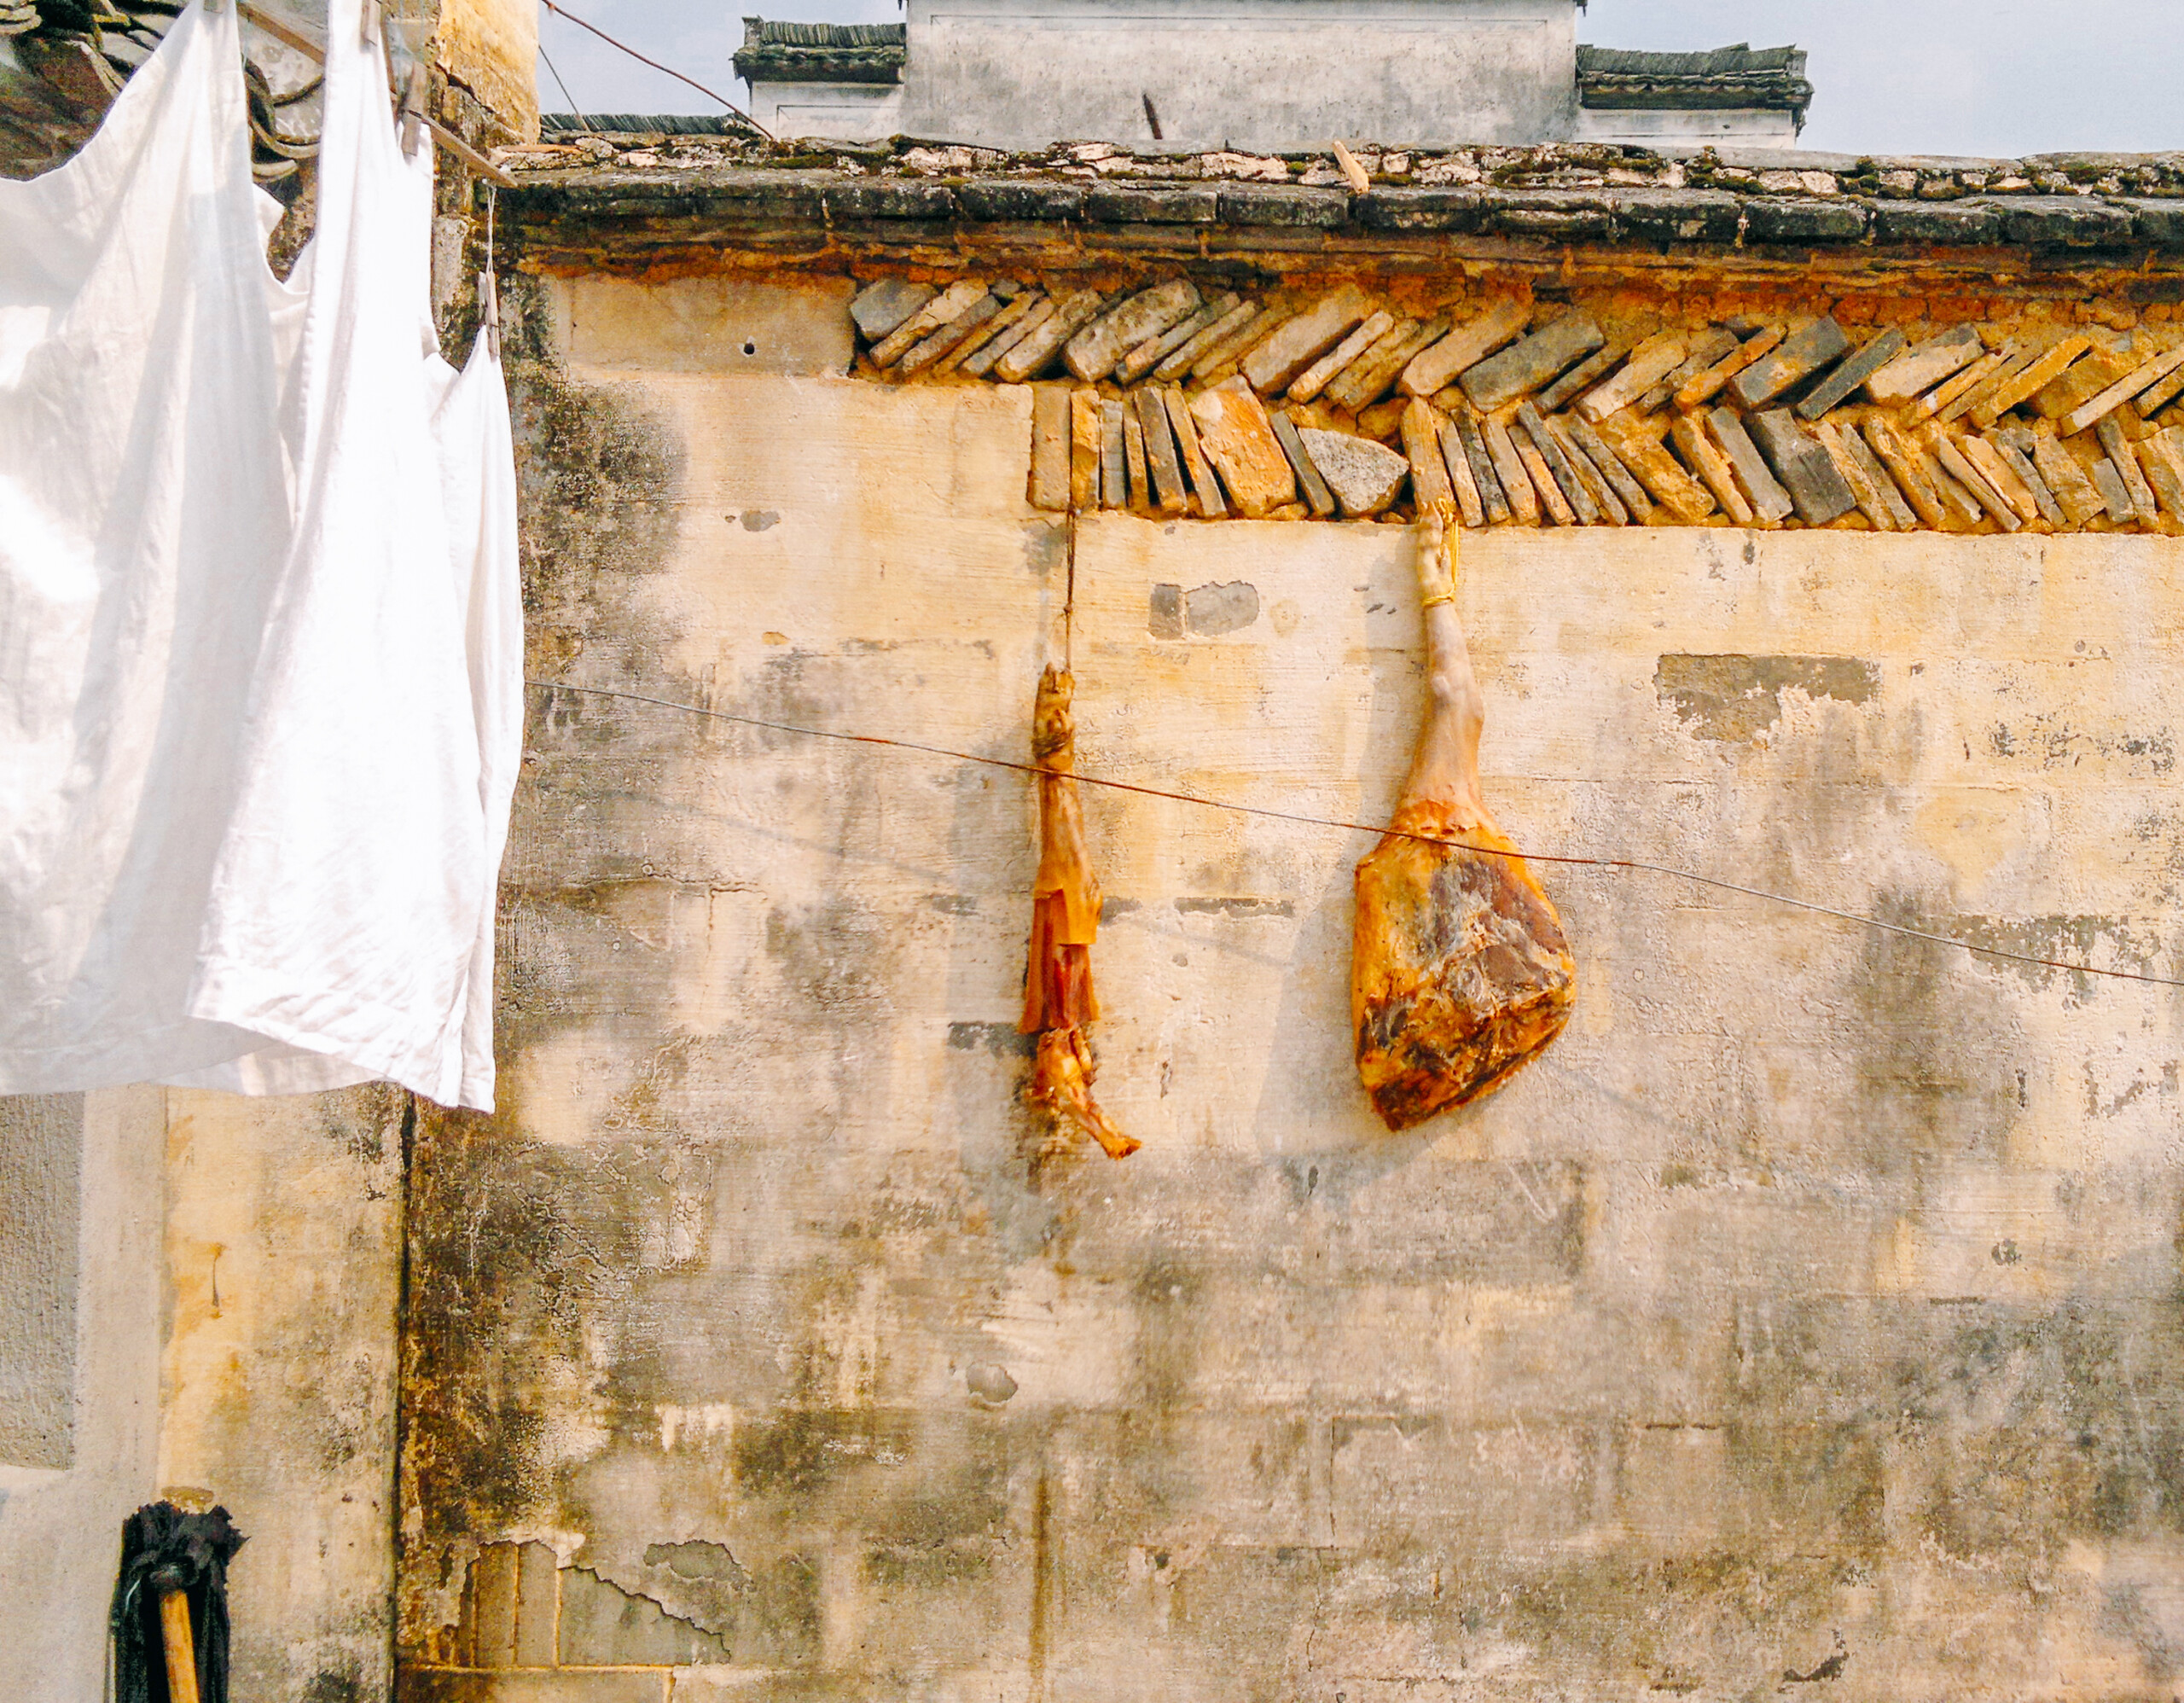 Ham hanging in Chinese home courtyard